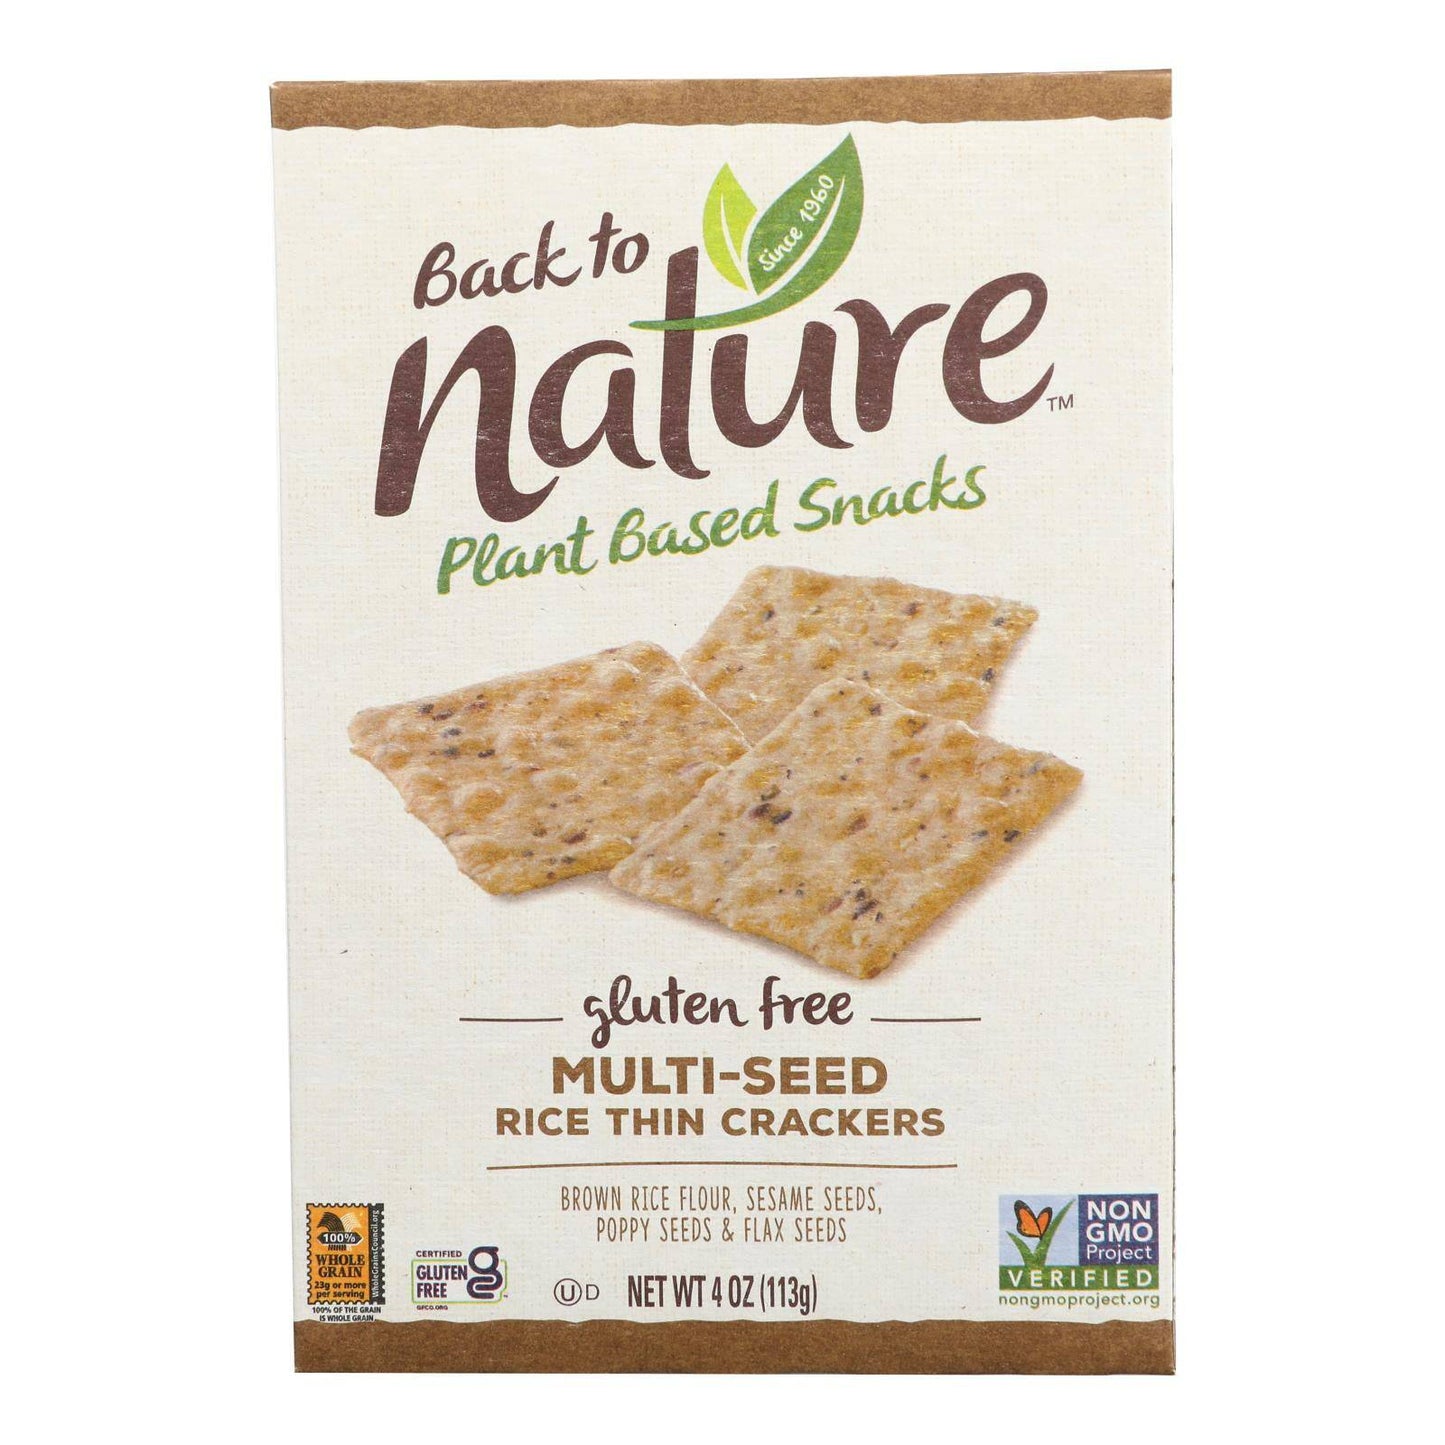 Buy Back To Nature Multi Seed Rice Thin Crackers - Brown Rice Sesame Seeds Poppy Seeds And Flax Seed - Case Of 12 - 4 Oz.  at OnlyNaturals.us